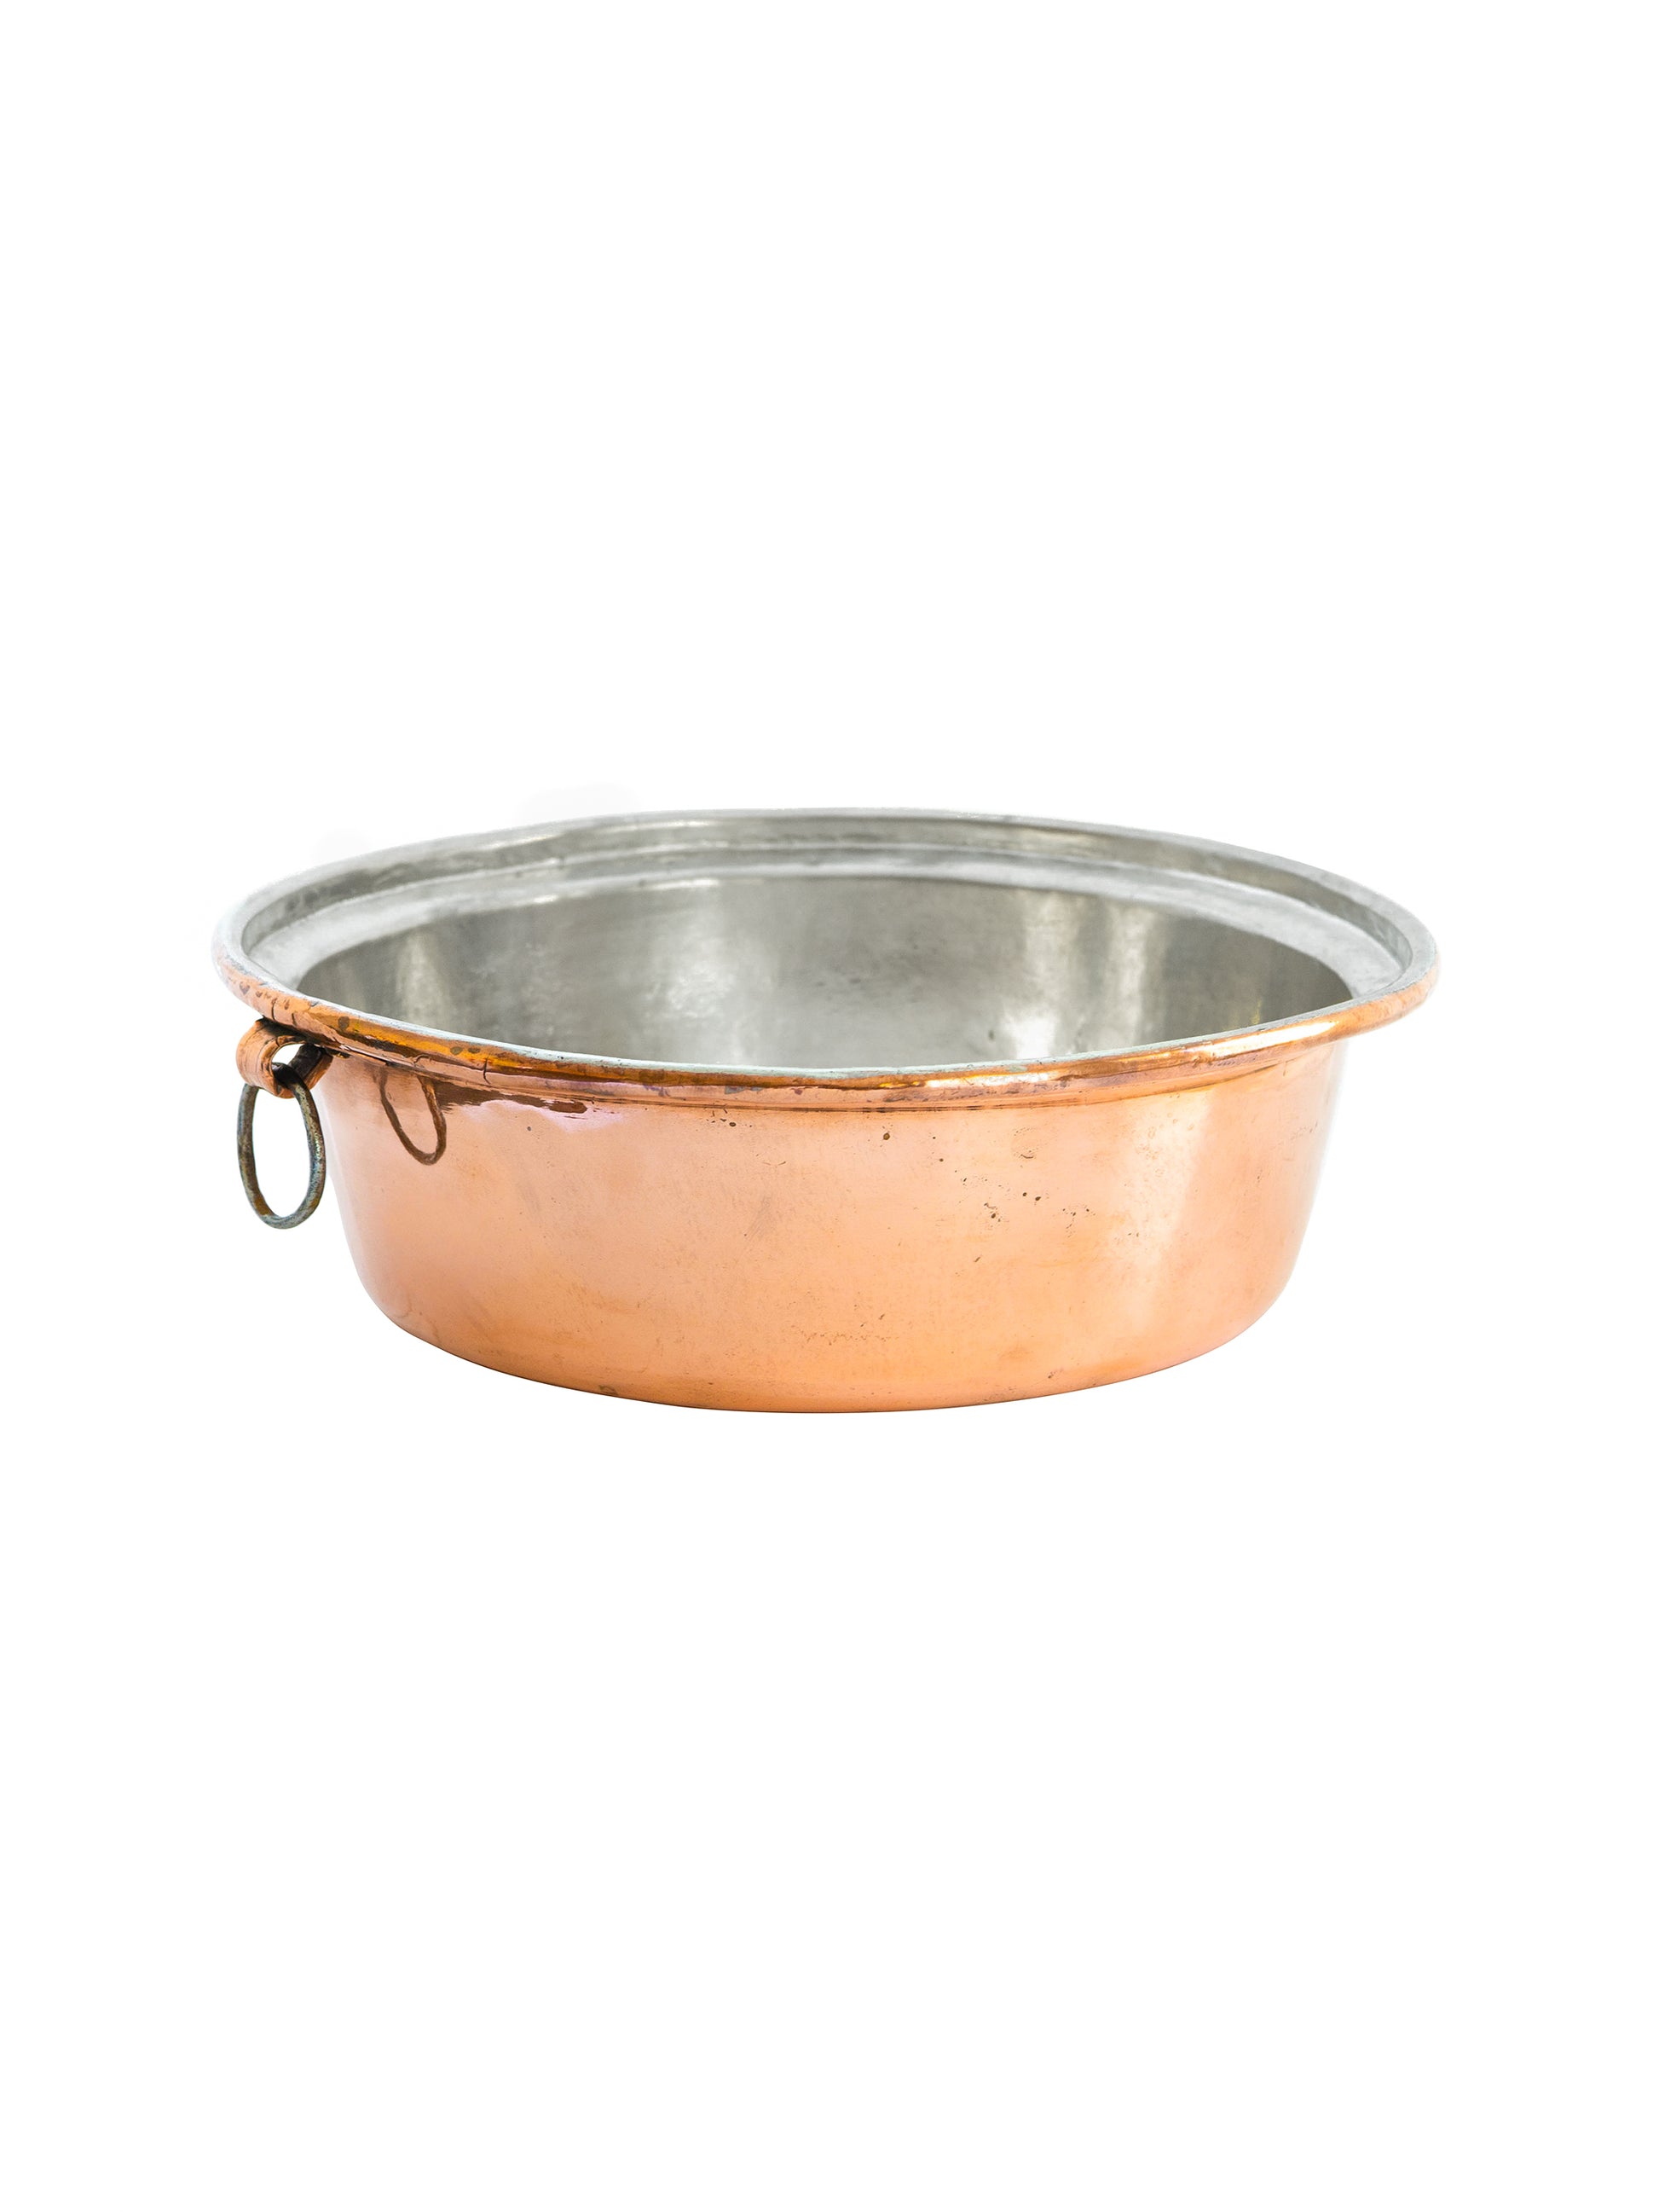 Shop the Vintage 1880s French Copper Mixing Bowl at Weston Table